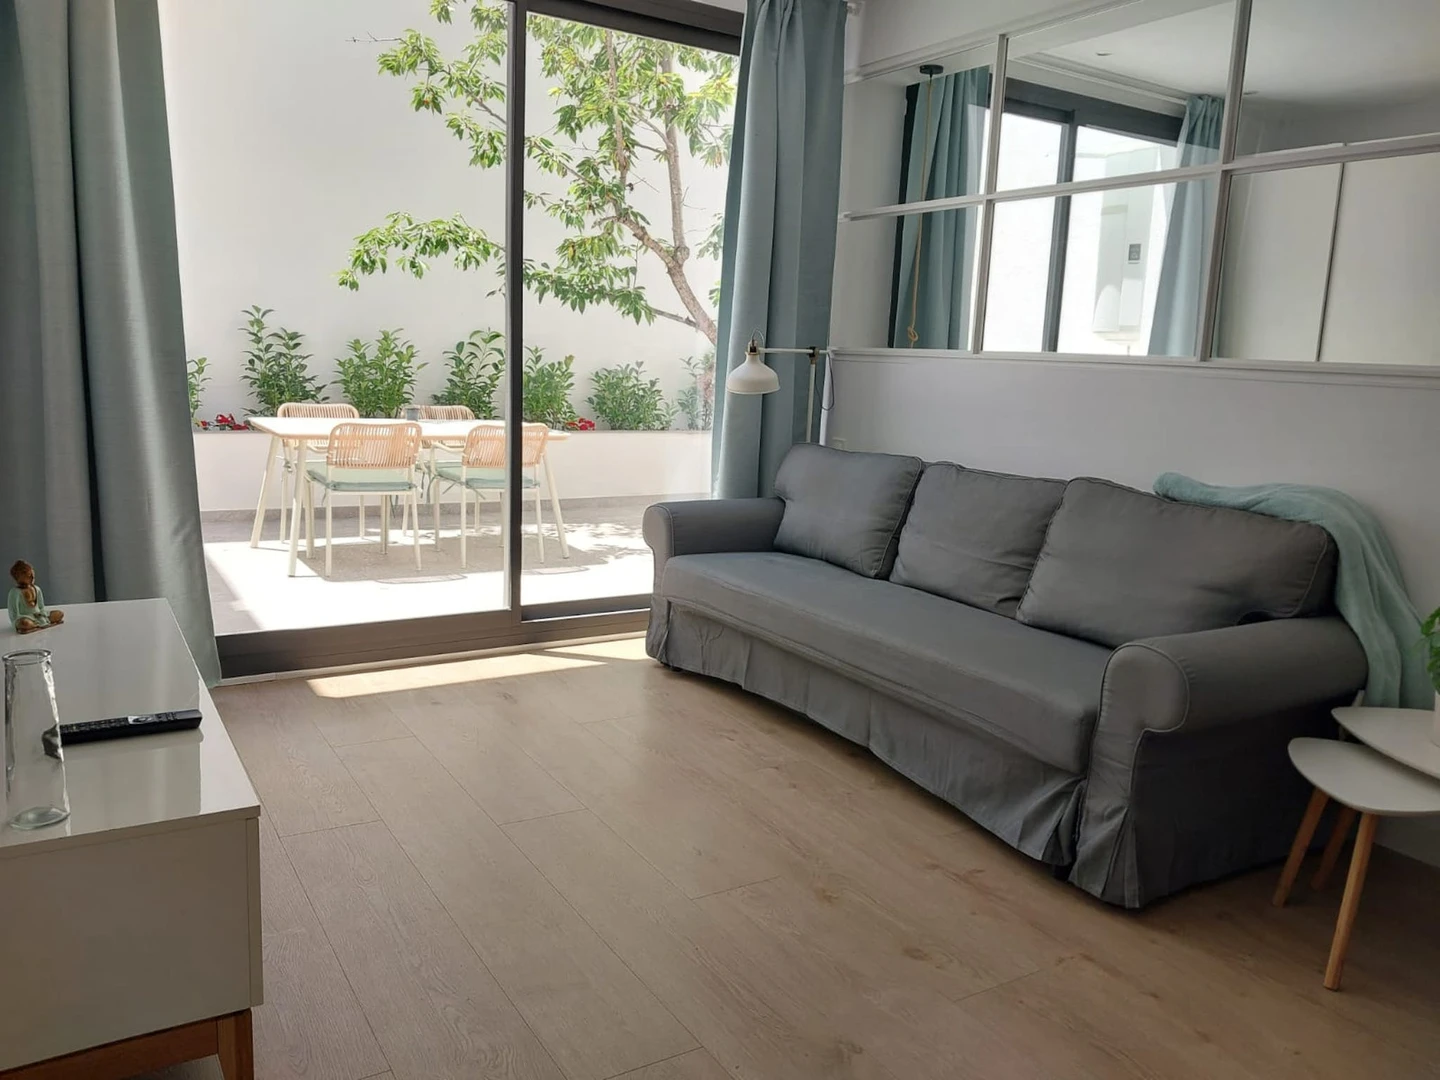 Two bedroom accommodation in Sabadell